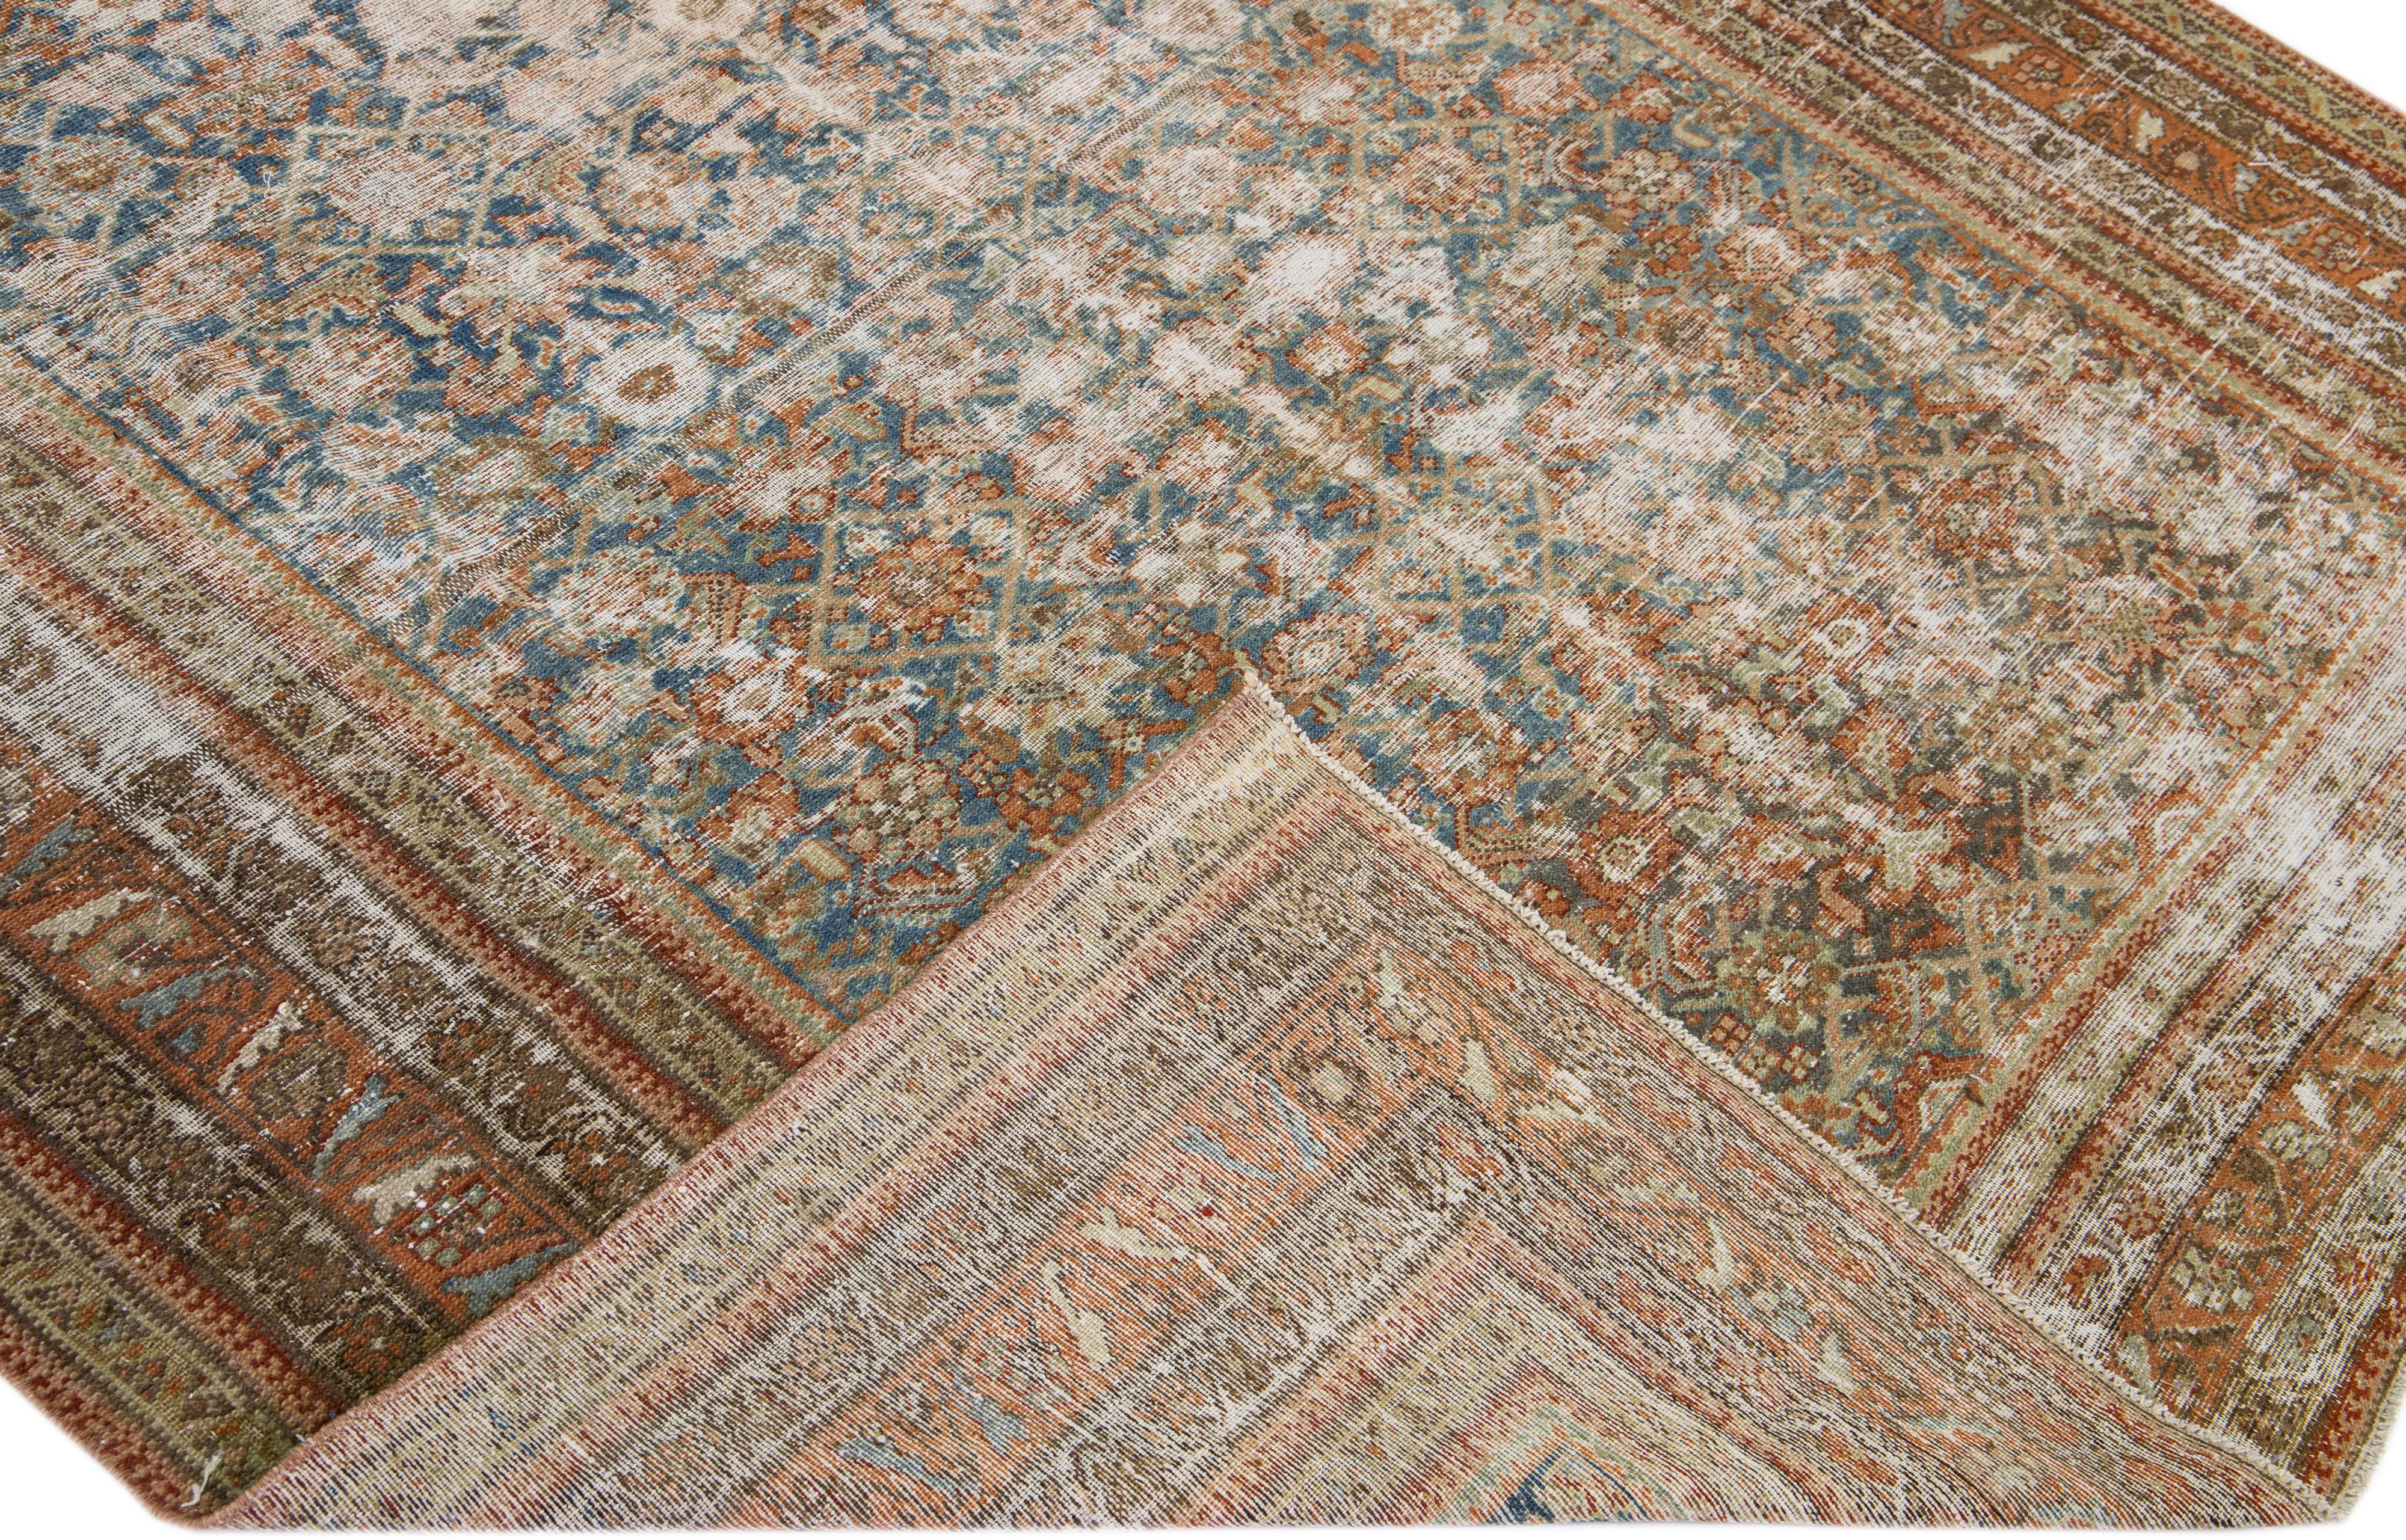 Beautiful antique Malayer hand-knotted wool rug with a blue field. This Persian piece has orange-rust and brown accent colors in a gorgeous all-over floral design.

This rug measures: 6'4